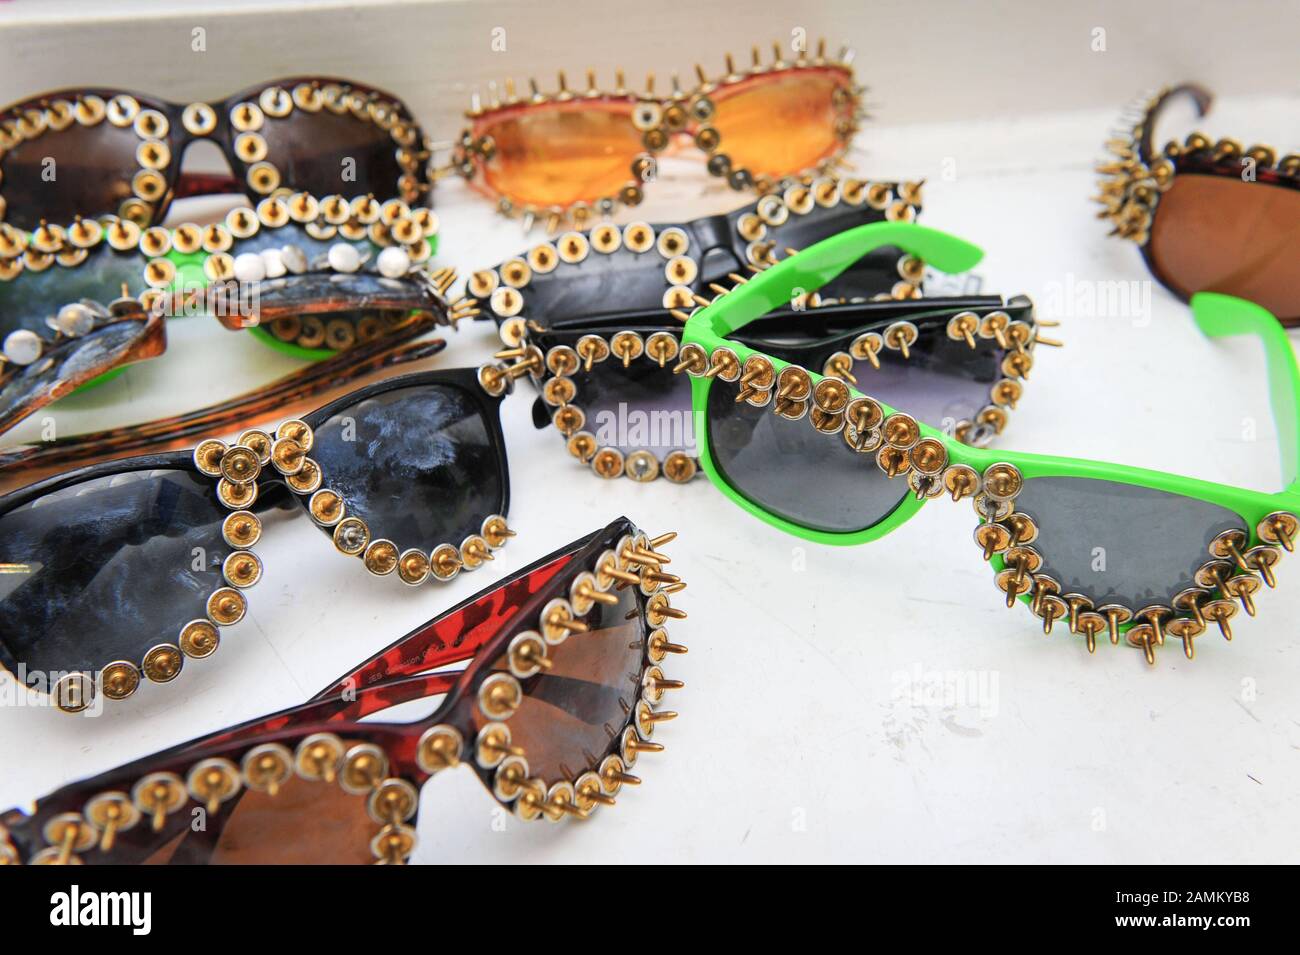 The dressmaker's shop 'La Silhouette' in Pariser Strasse 13 in Haidhausen offers young women from all over the world with difficult biographies the opportunity to train as dressmakers. In the picture sunglasses with thumbtack rivets. The institution is supported by the non-profit association 'Junge Frauen und Beruf e.V.'. [automated translation] Stock Photo